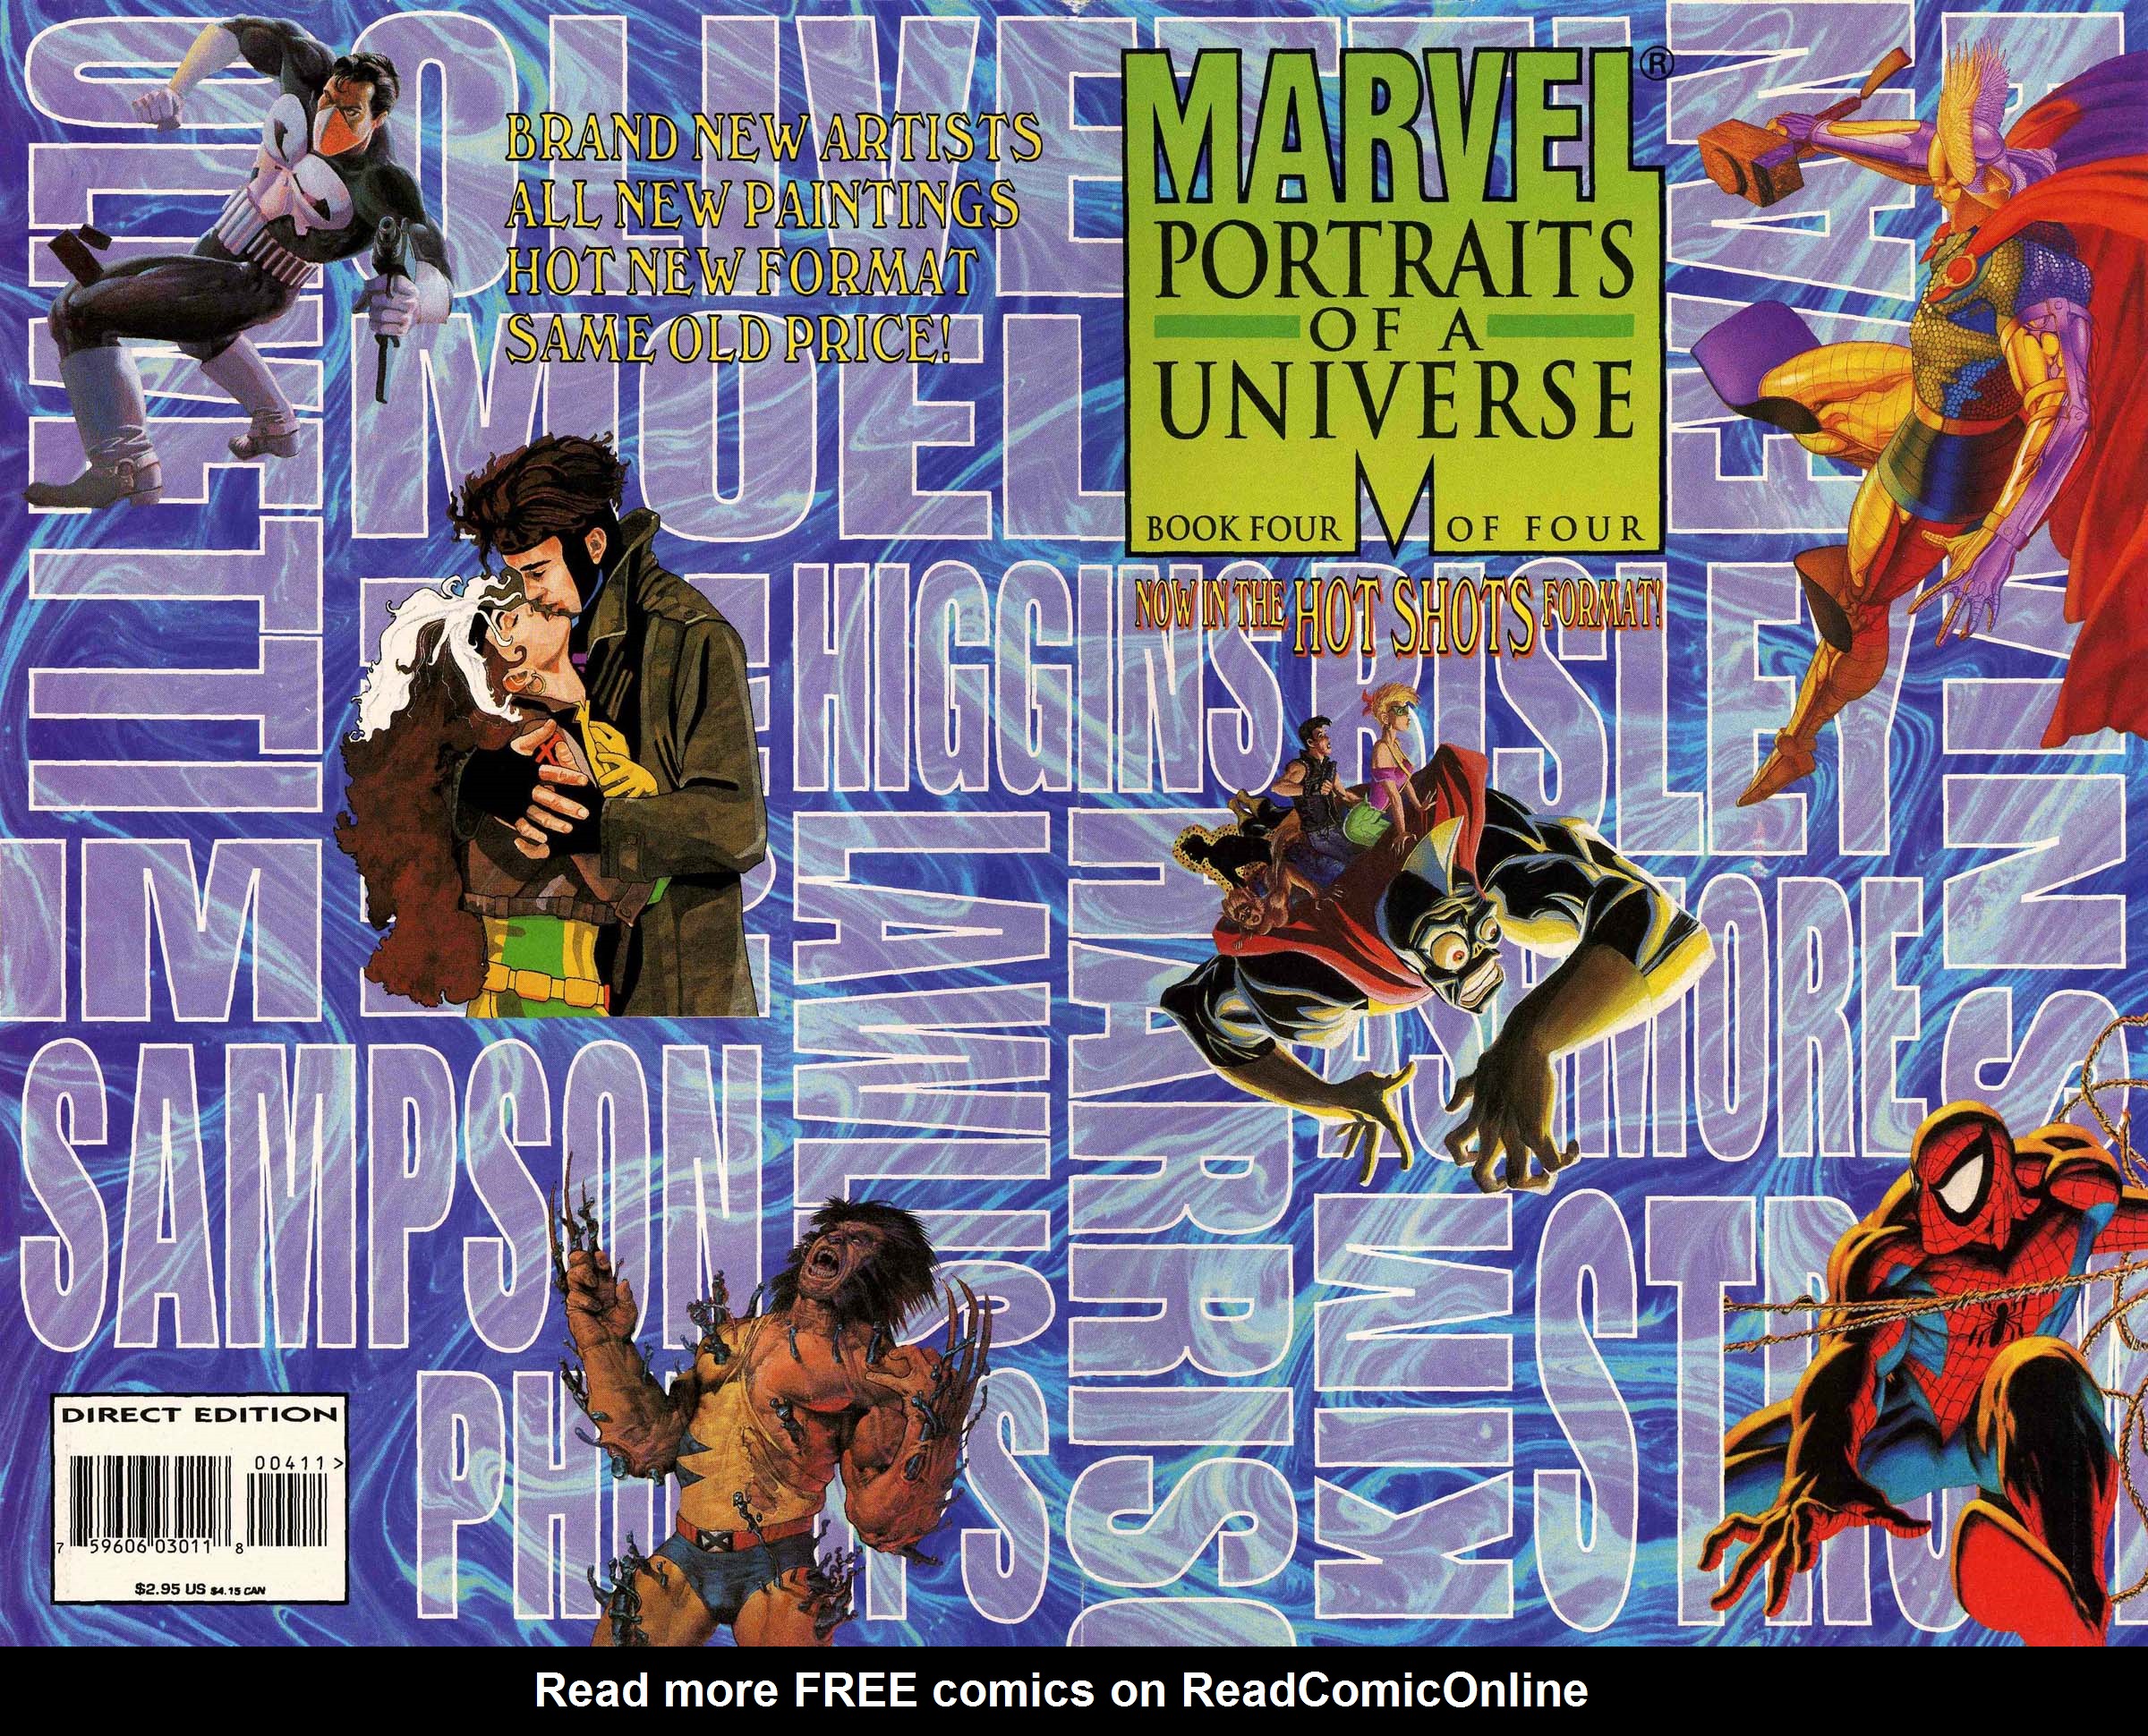 Read online Marvels: Portraits comic -  Issue #4 - 1